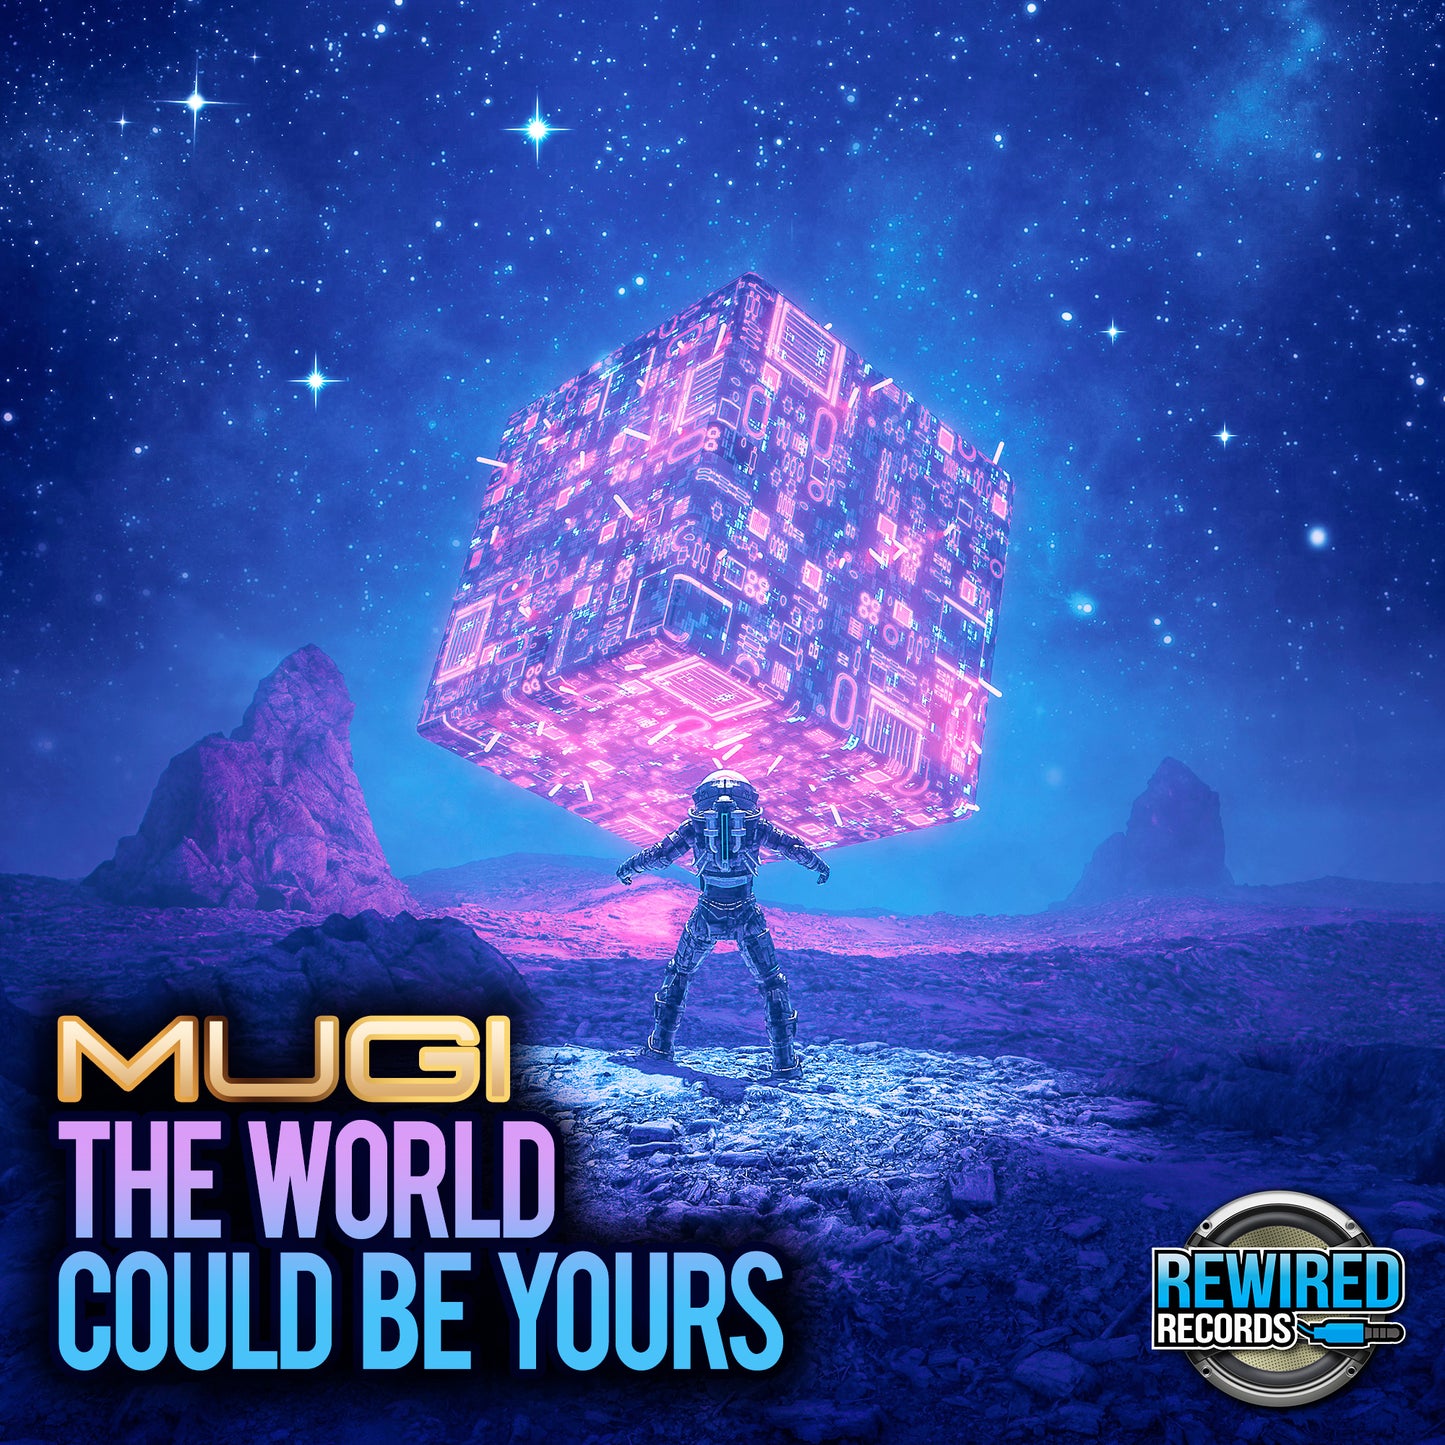 Mugi - The World Could Be Yours - Rewired Records